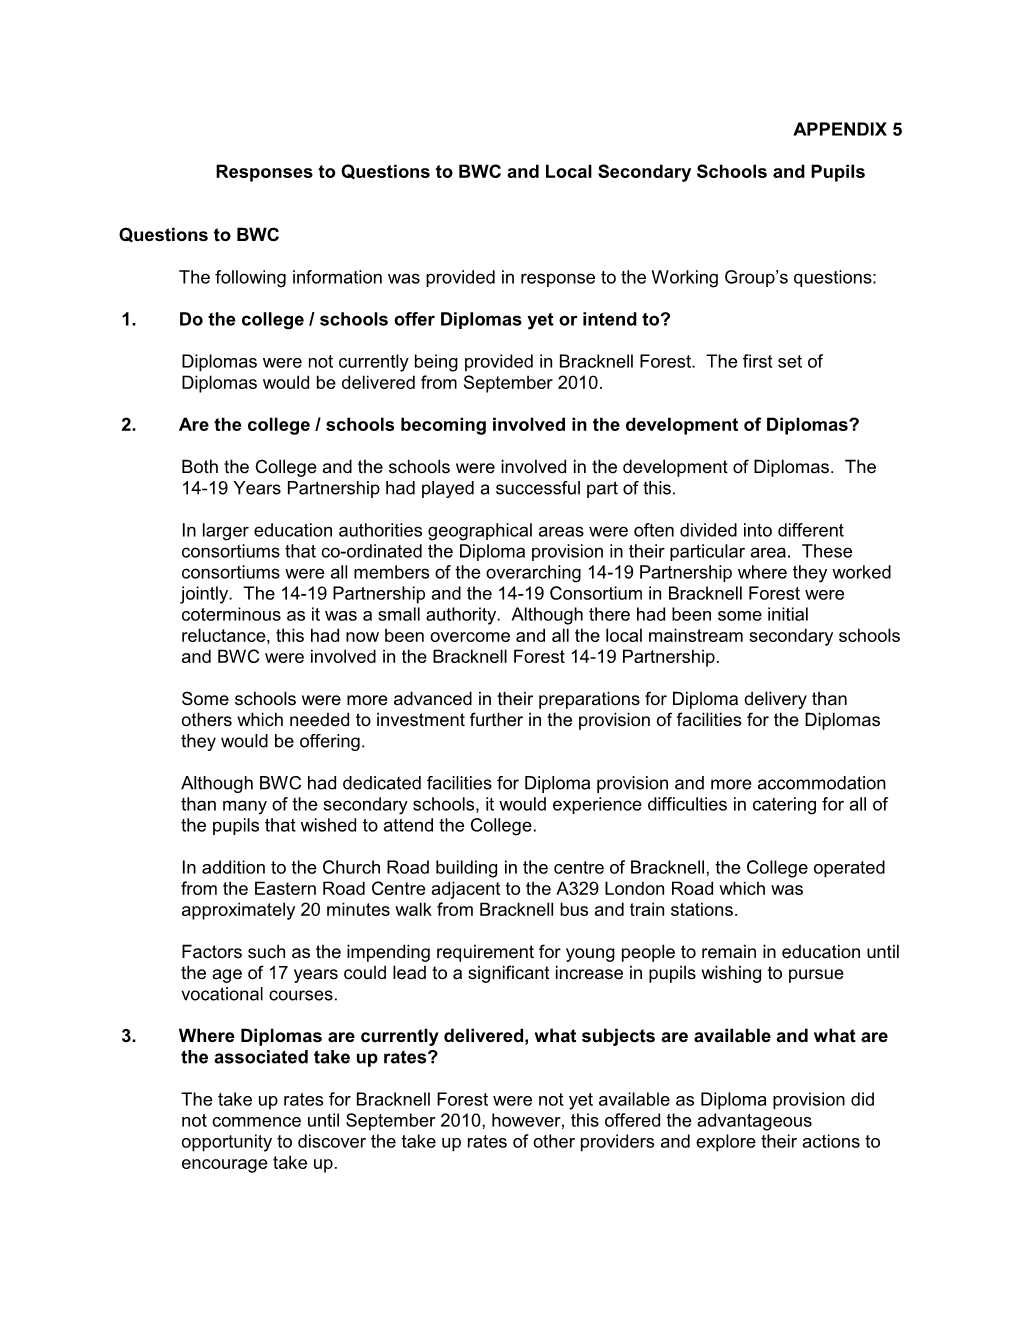 APPENDIX 5 Responses to Questions to BWC and Local Secondary